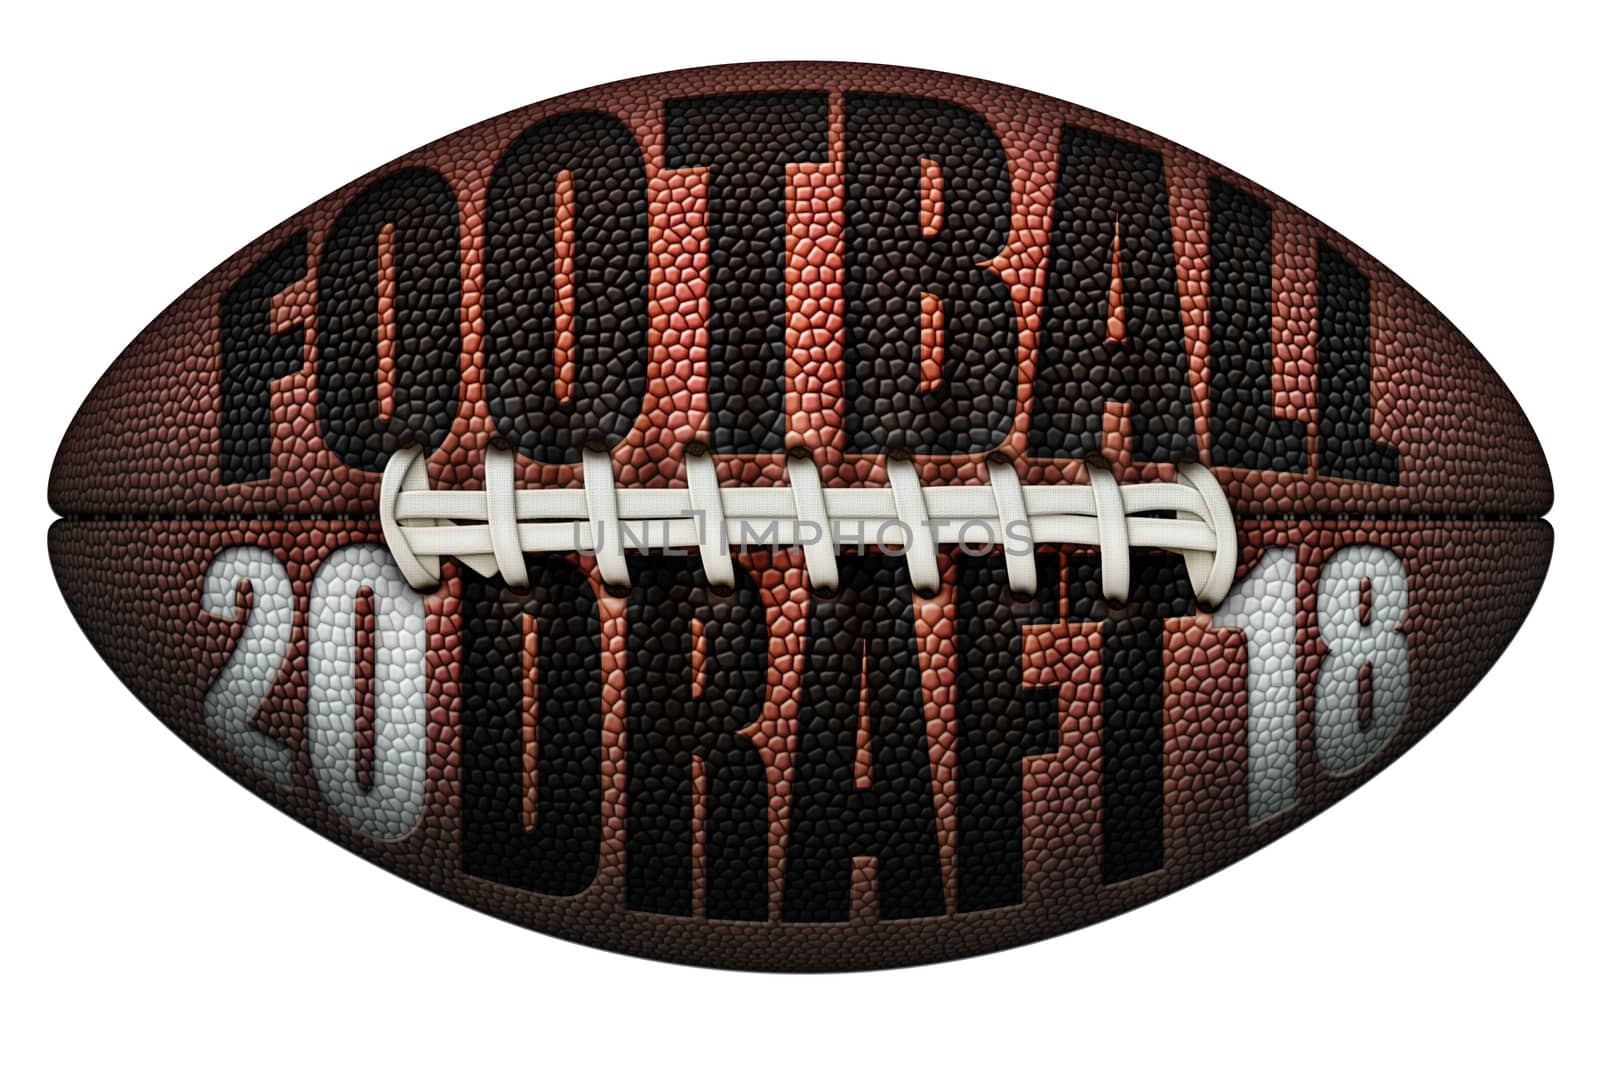 Digital illustration of a football with FOOTBALL DRAFT and 2018 embossed onto it. Includes a Clipping Path.